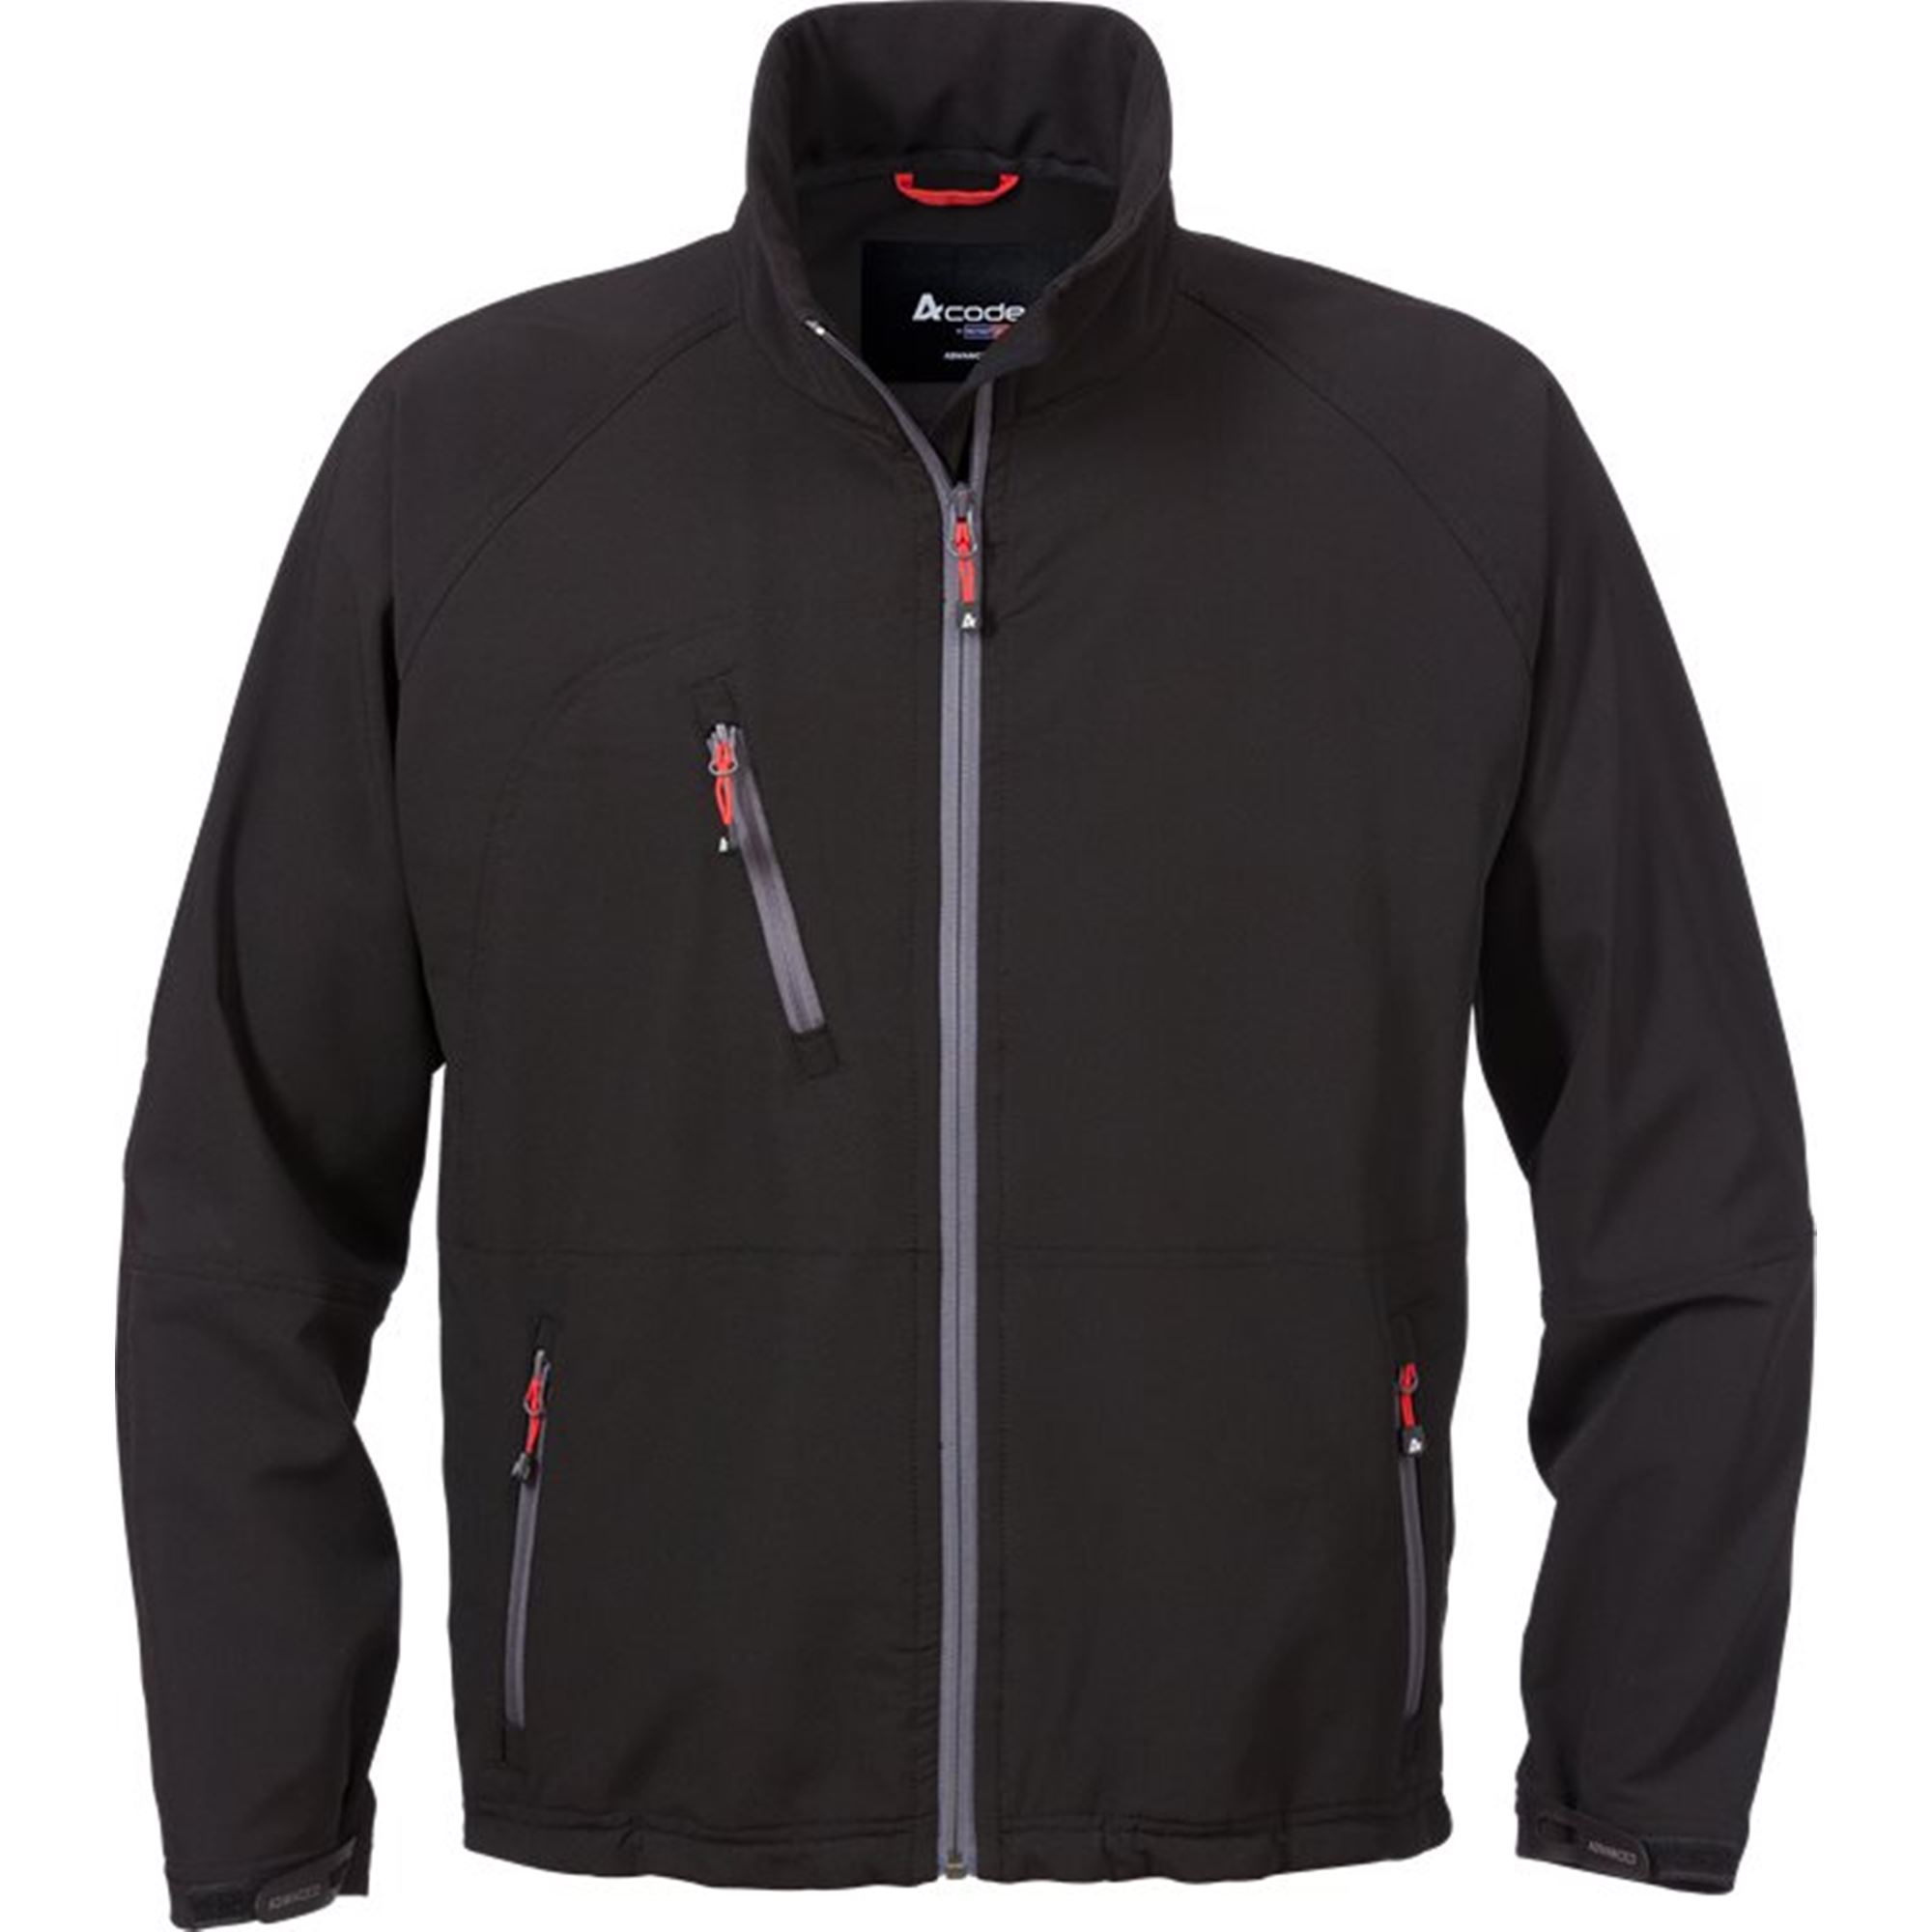 Acode Soft Shell Jacket 1431 by Fristads